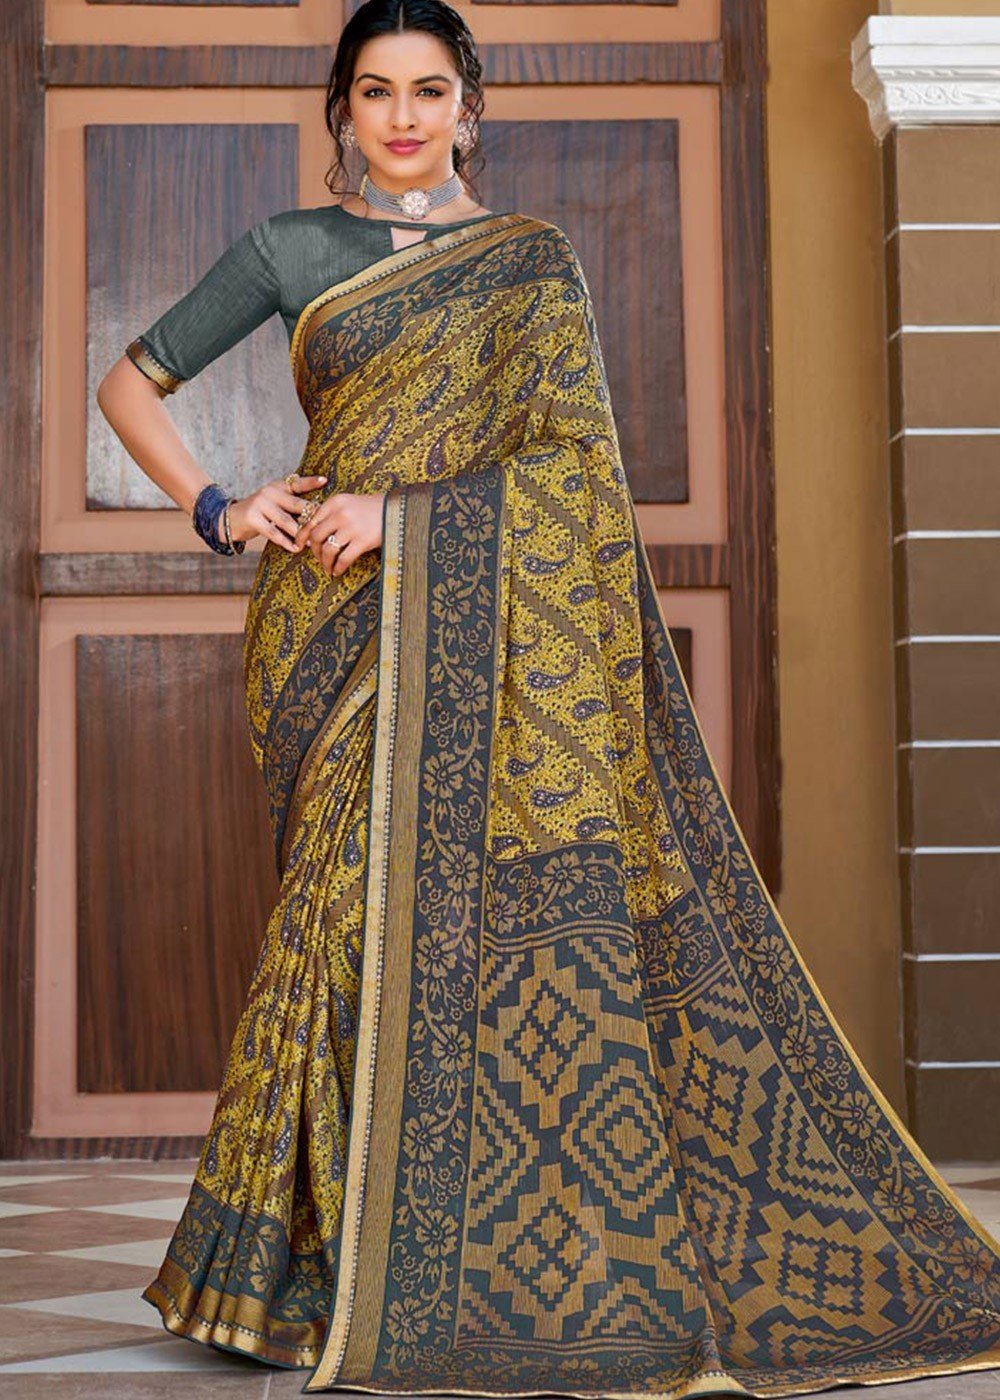 Soch Yellow Chiffon Brasso Motifs Traditional Saree [Free Size] in  Anantapur at best price by Sahebha Nx - Justdial